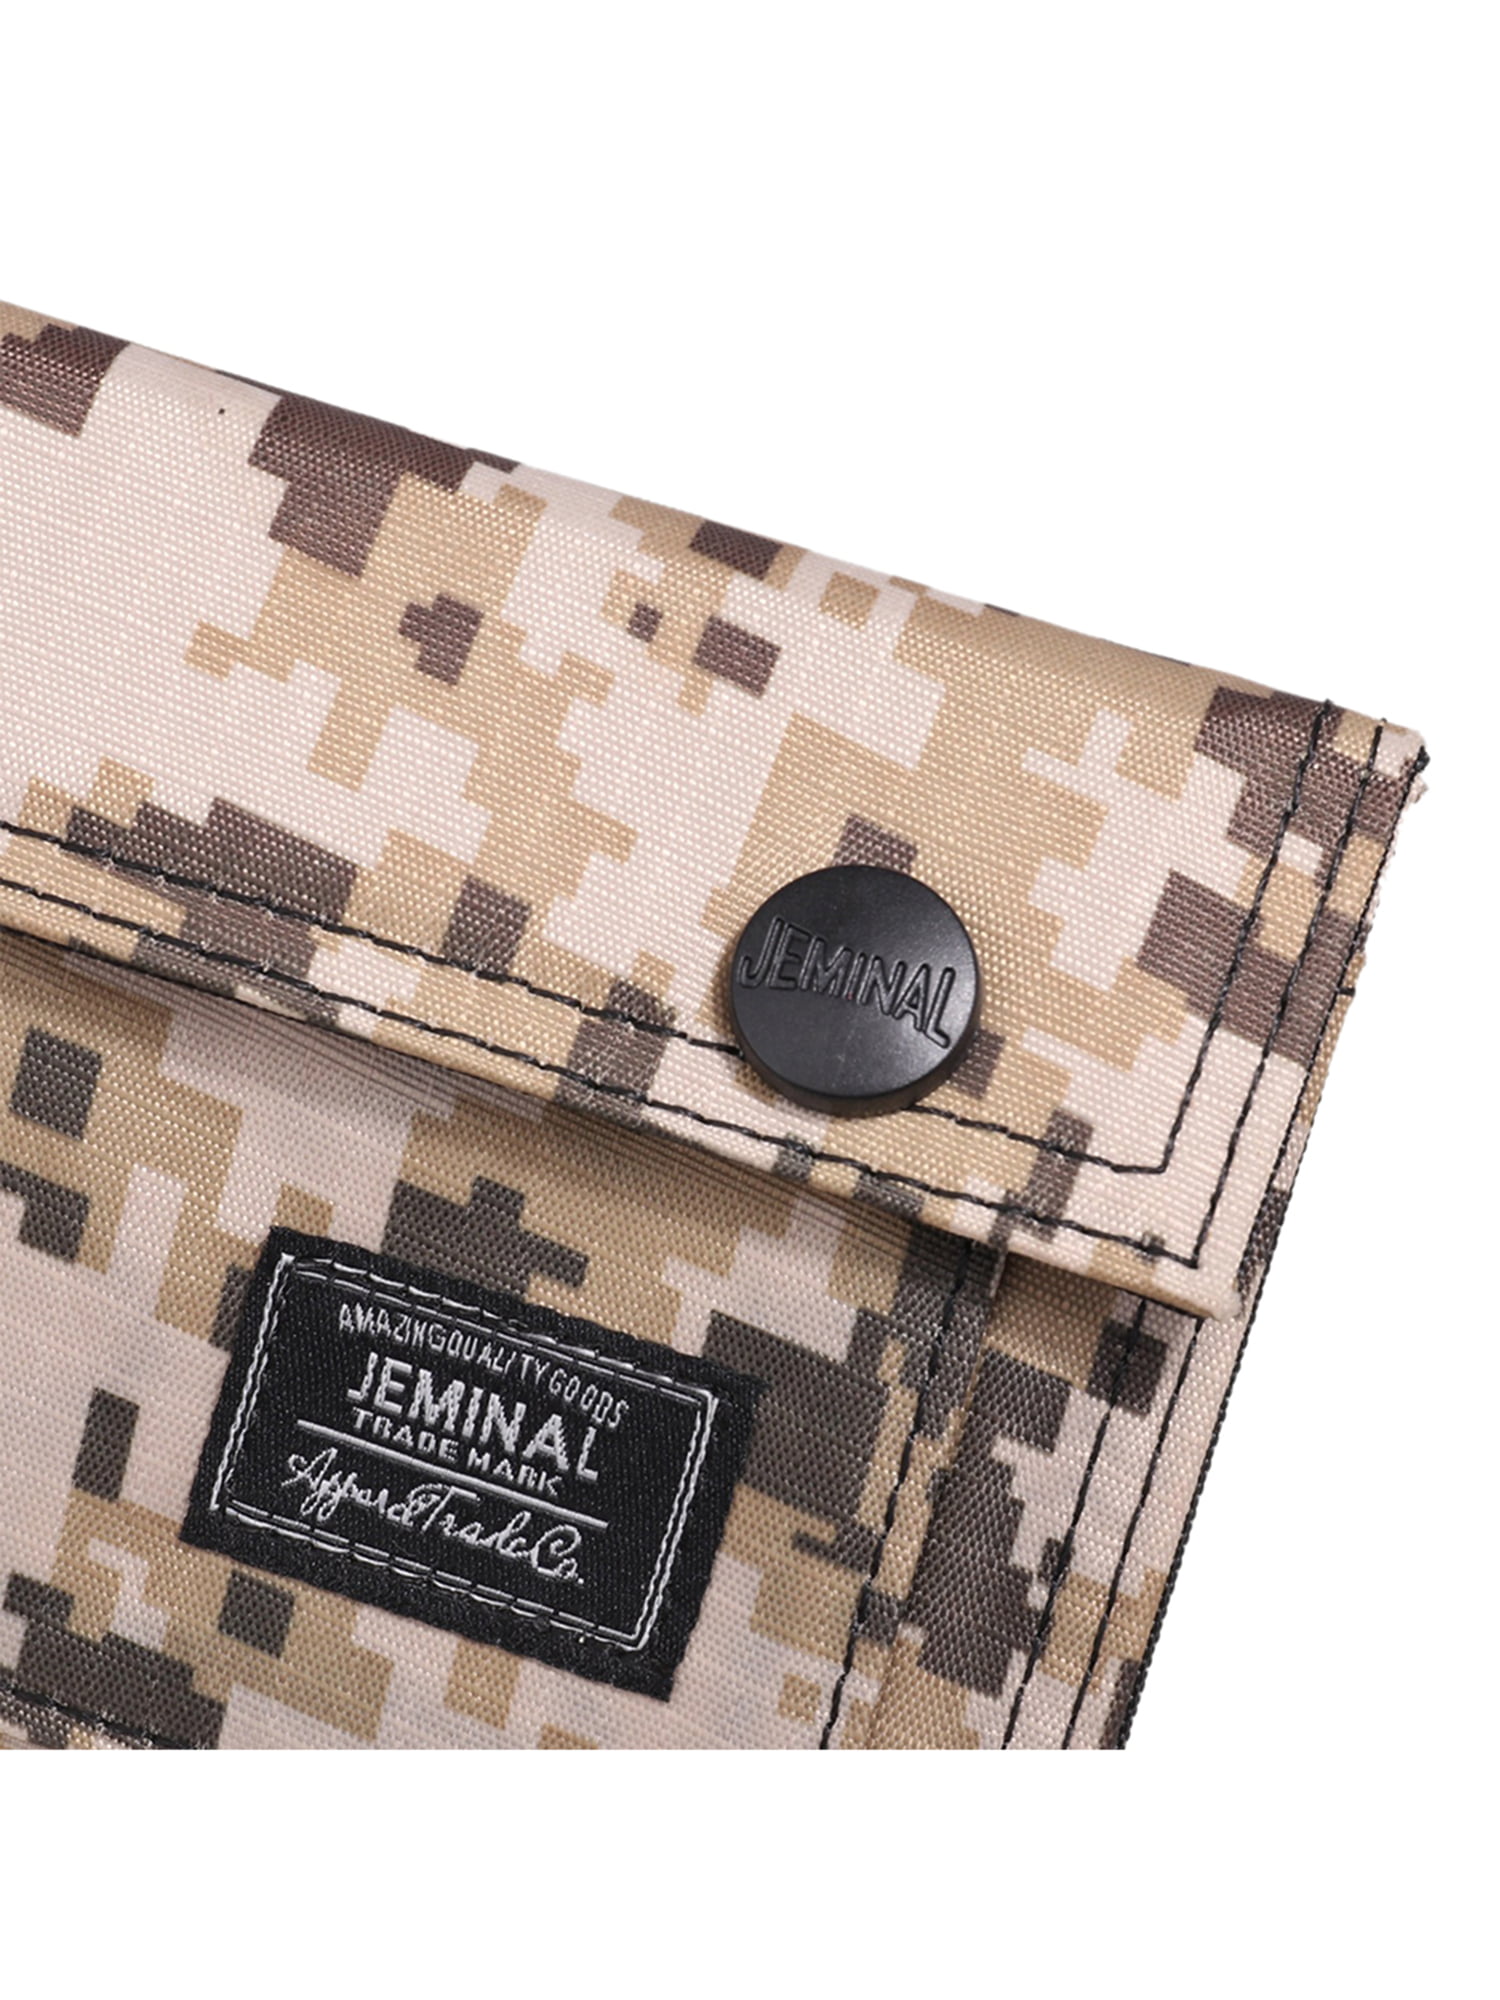 Men's Tactical Military Style Minimalist Wallet - H01 Camouflage